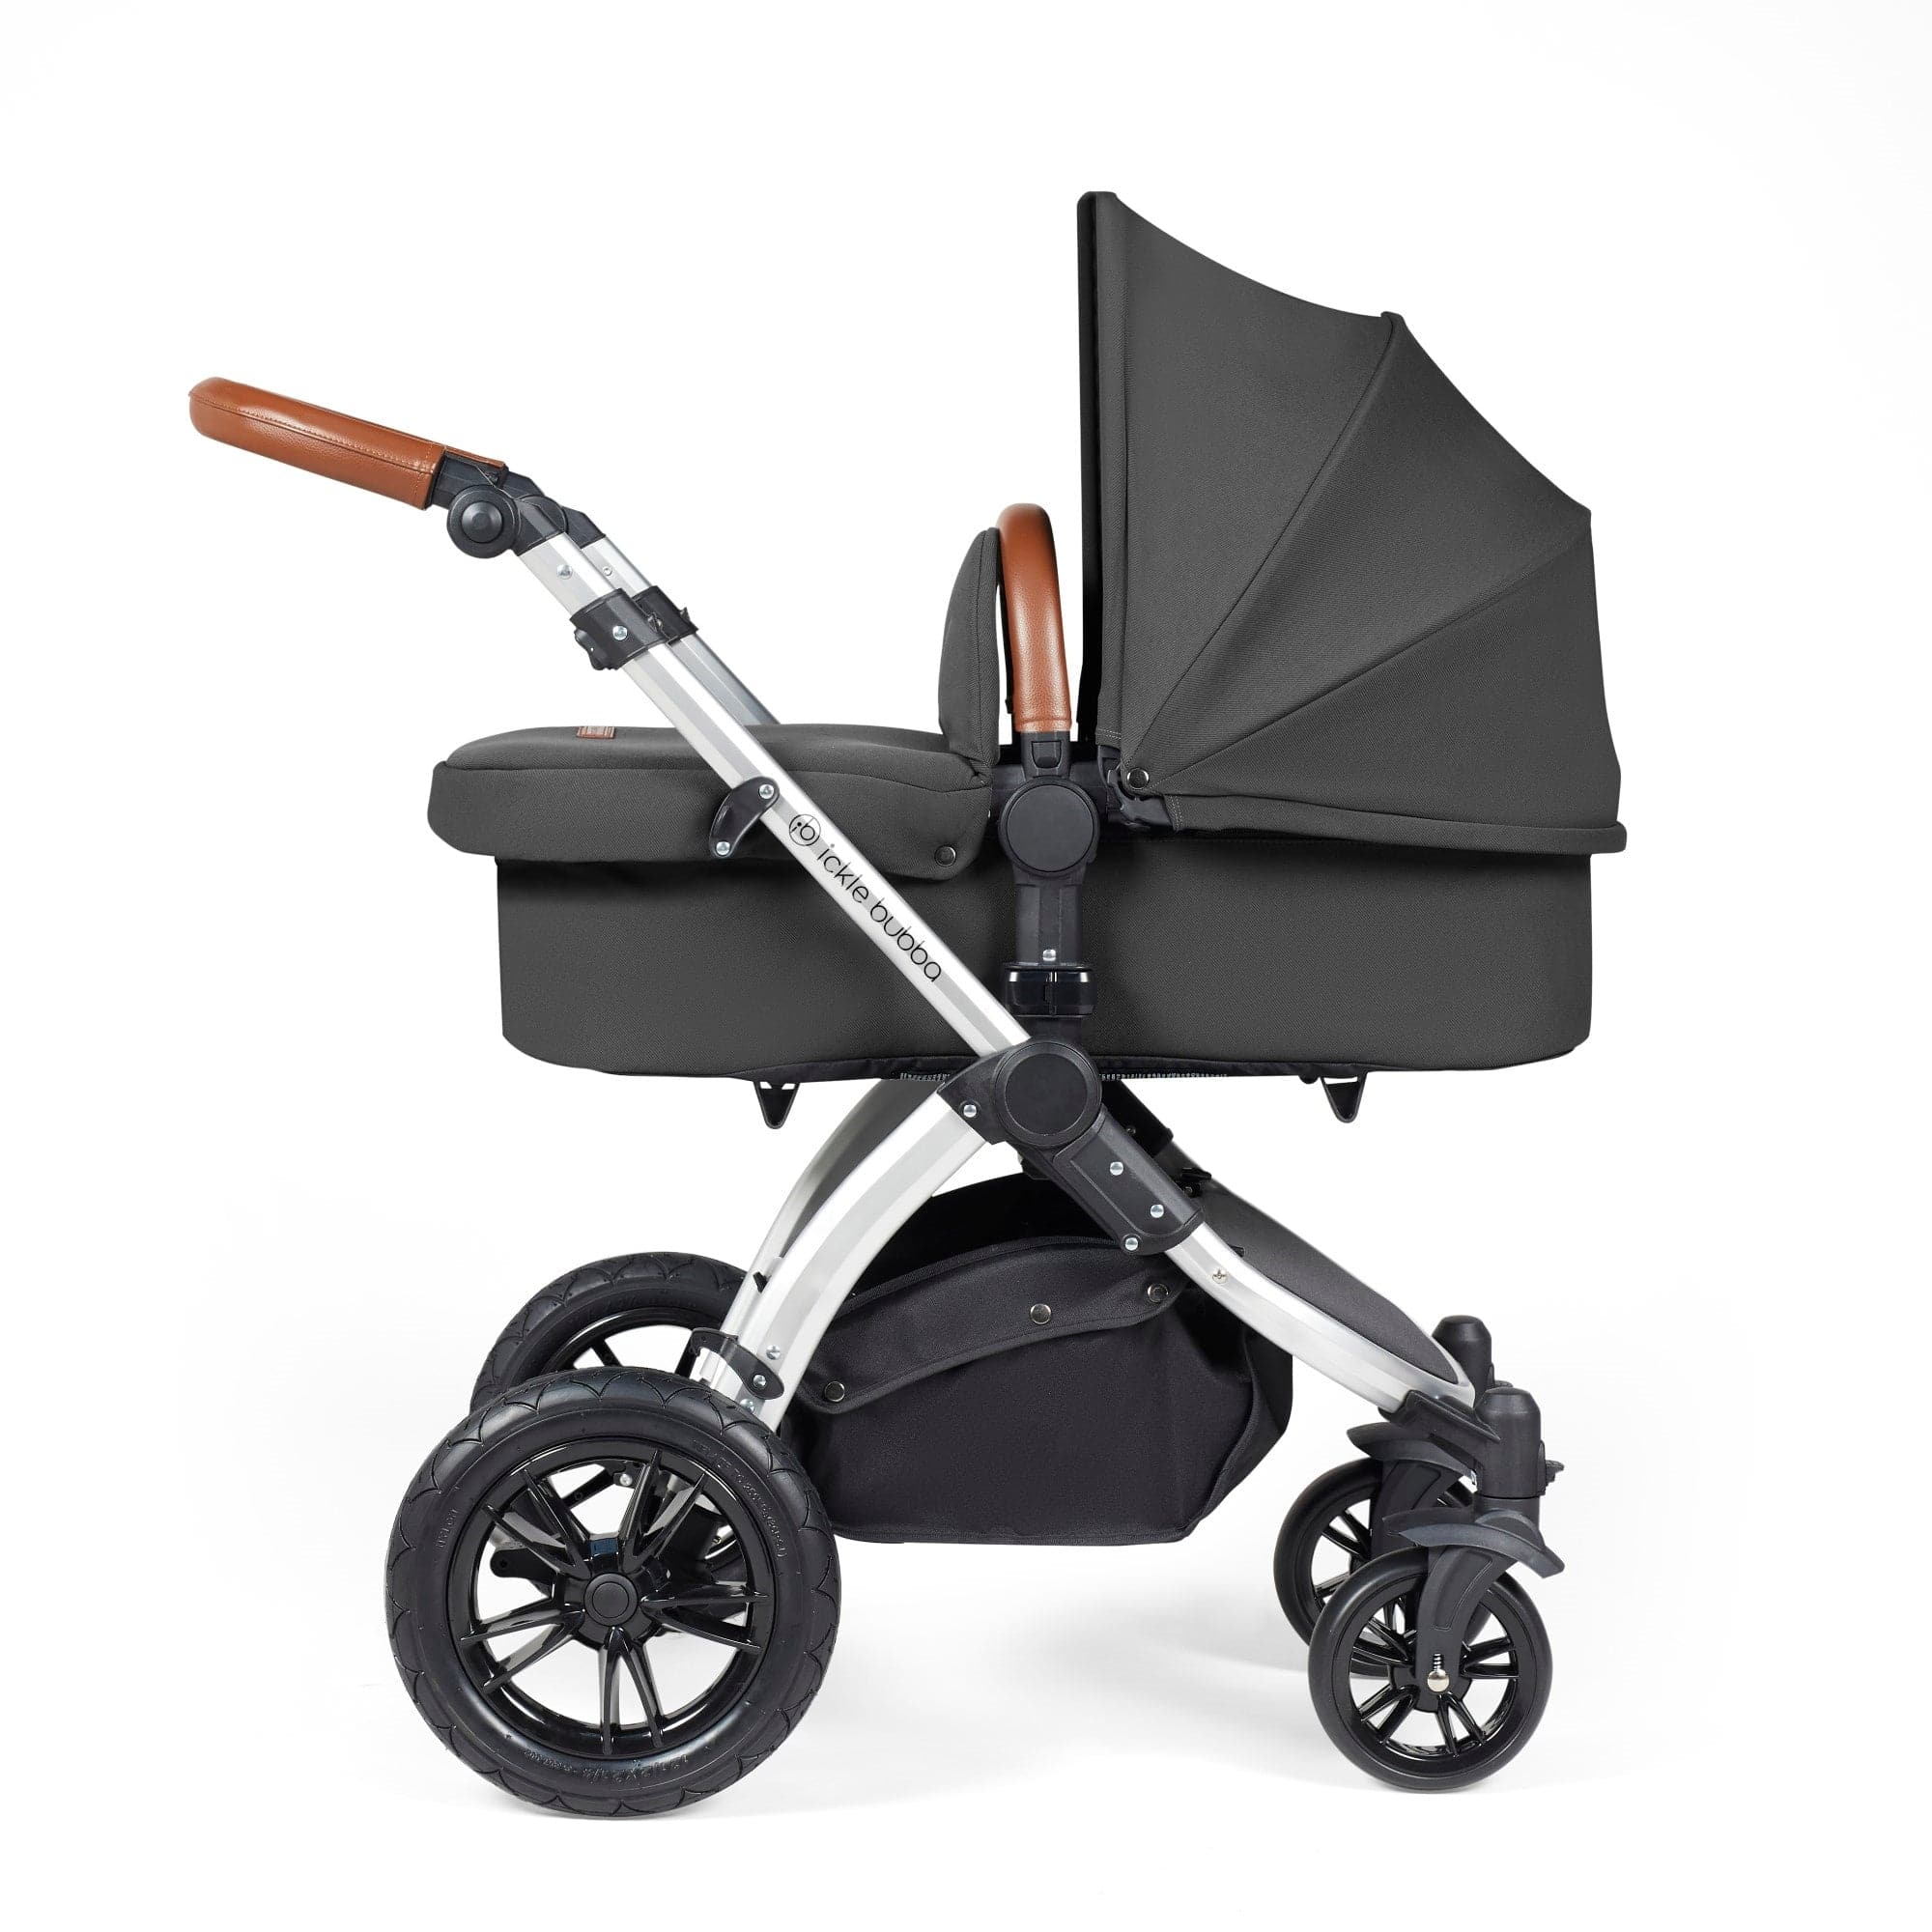 Ickle Bubba Stomp Luxe All-in-One I-Size Travel System With Isofix Base - Silver / Charcoal Grey / Tan -  | For Your Little One